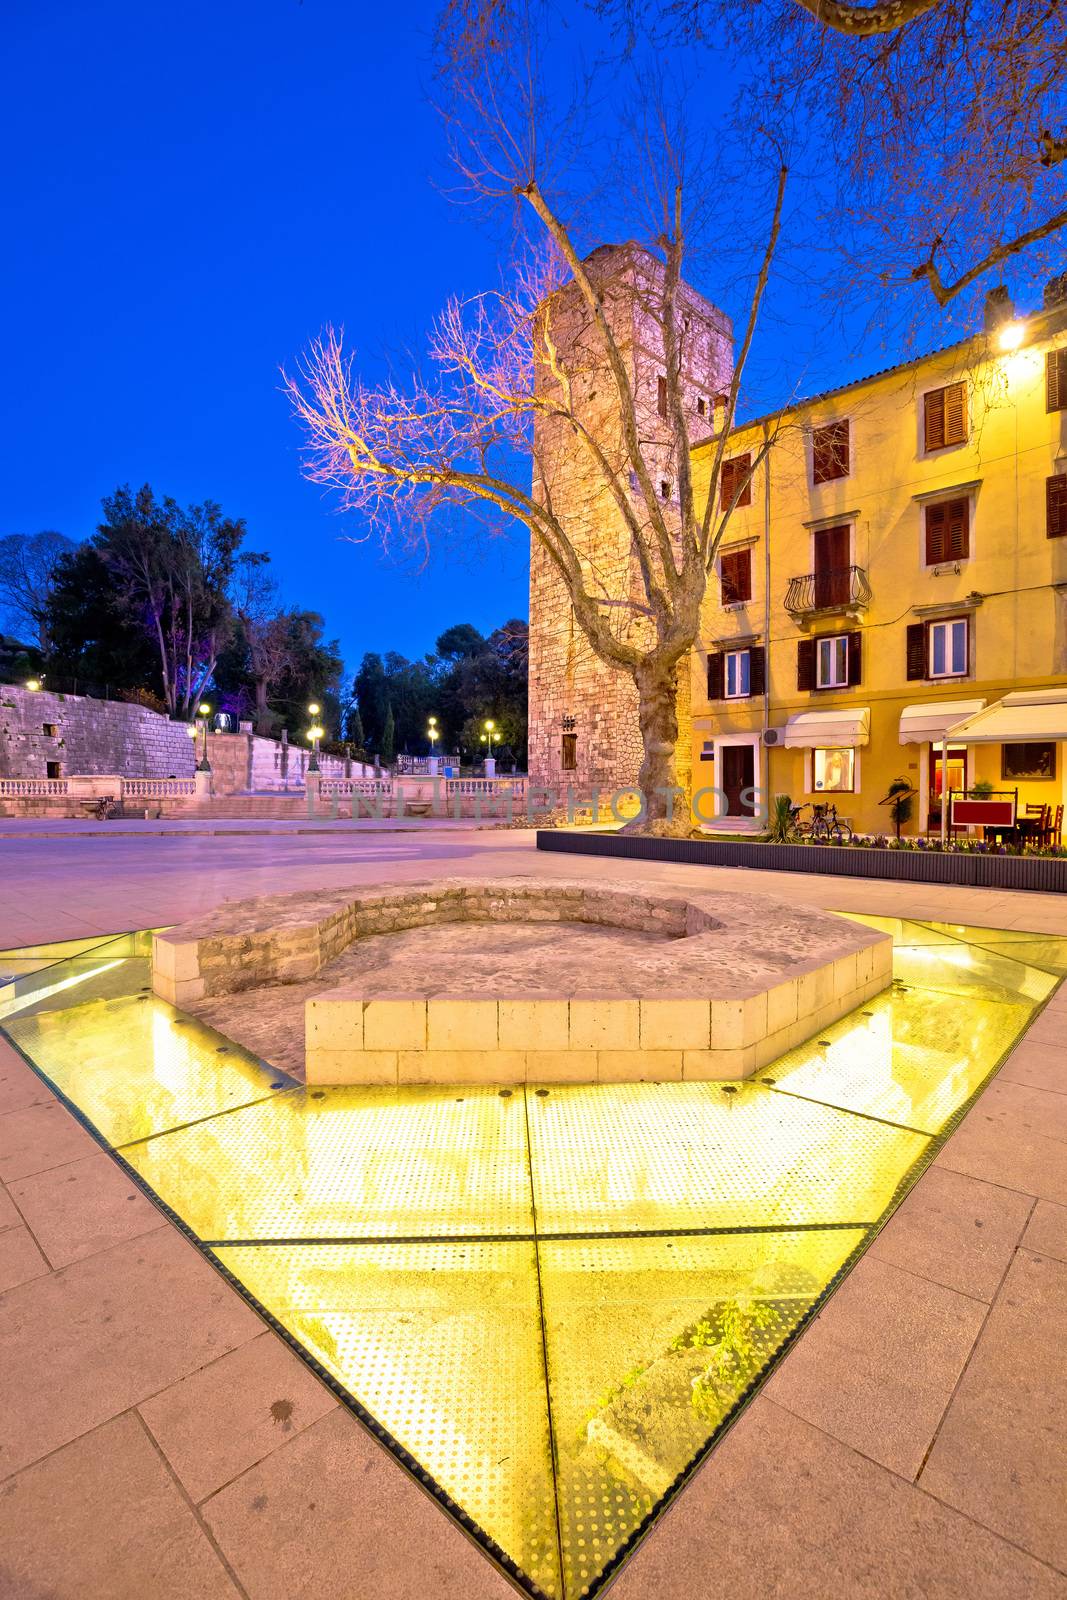 Town of Zadar five wells square evening view by xbrchx